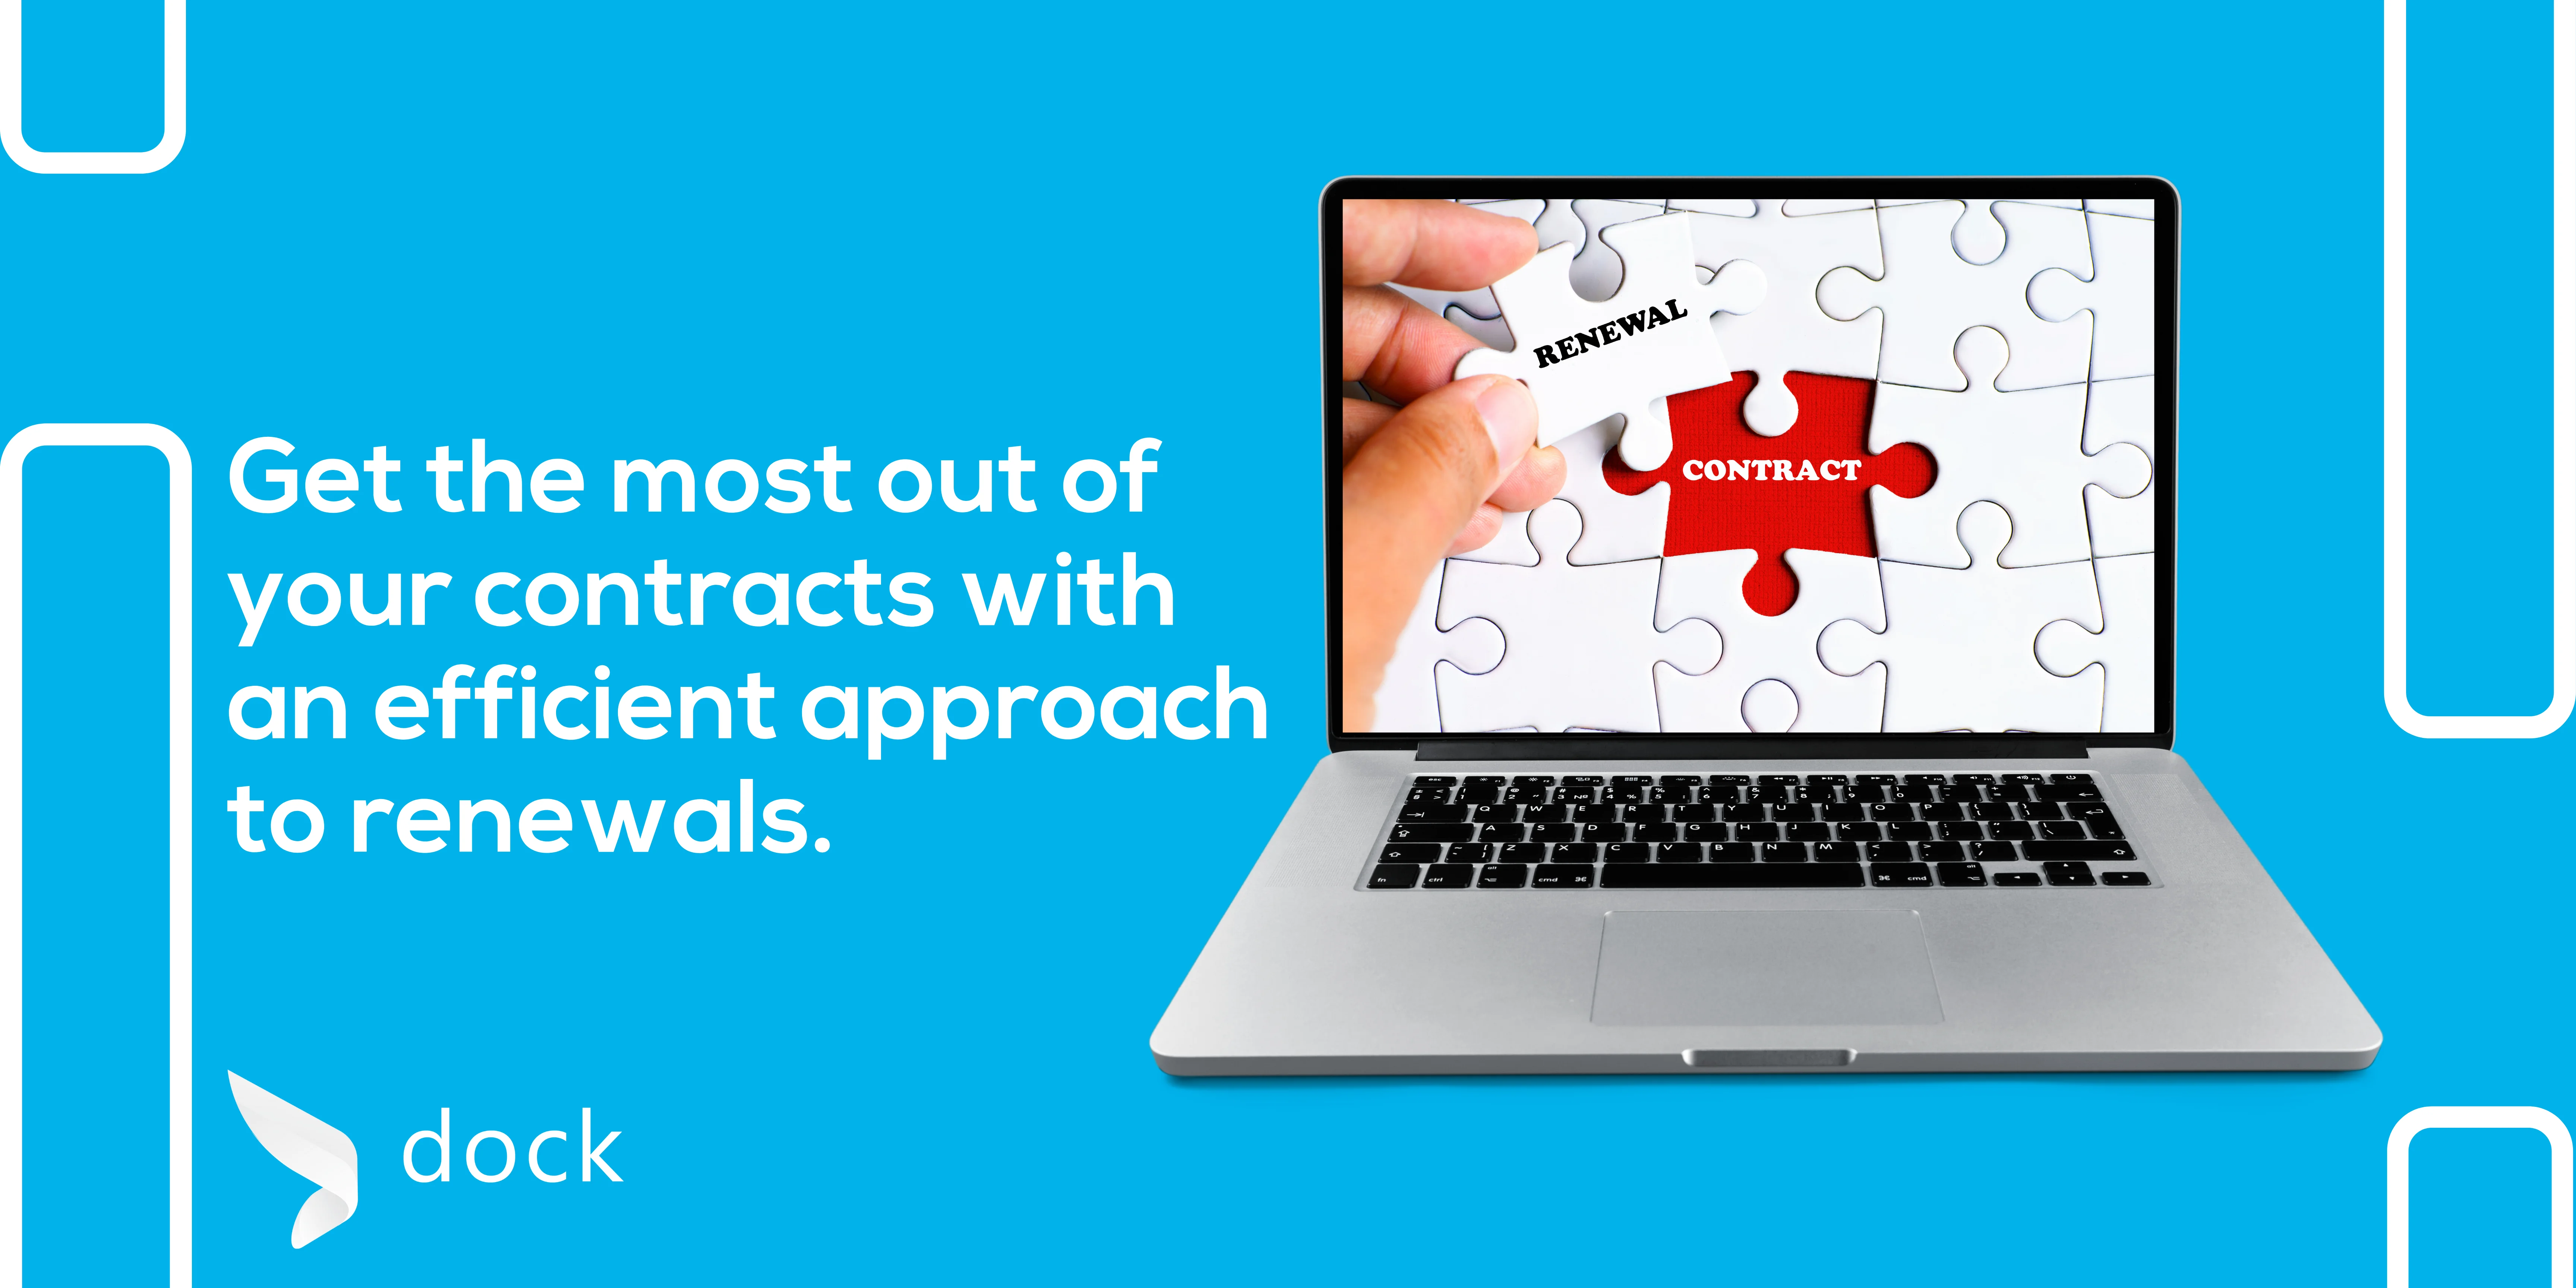 Get the most out of your contracts with an efficient approach to renewals. (1)